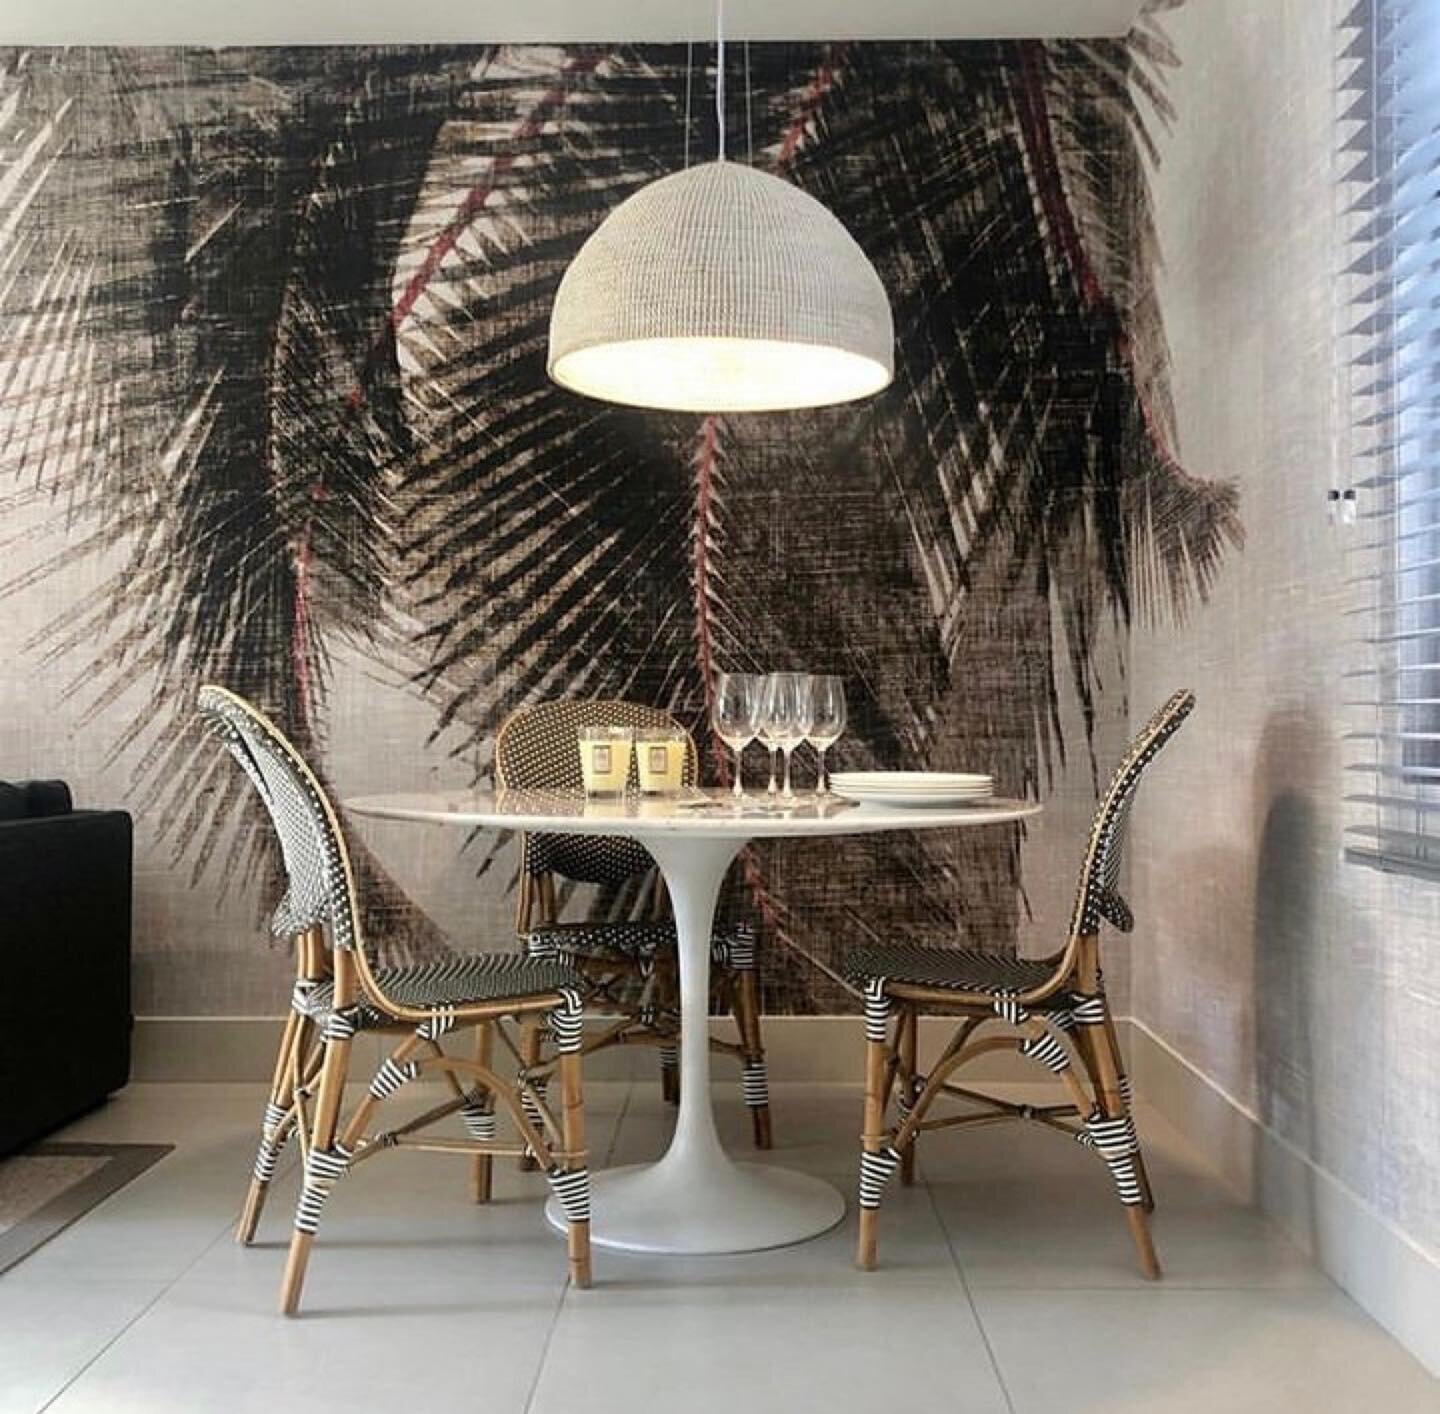 Amazing wallpaper by @elitisfrance 🌴 - The full range of Elitis products is available to order at our showroom.
.
#elitisfrance #wallpaper #interiordesign #interior #design #style #palms #repost 📸: @elitisfrance